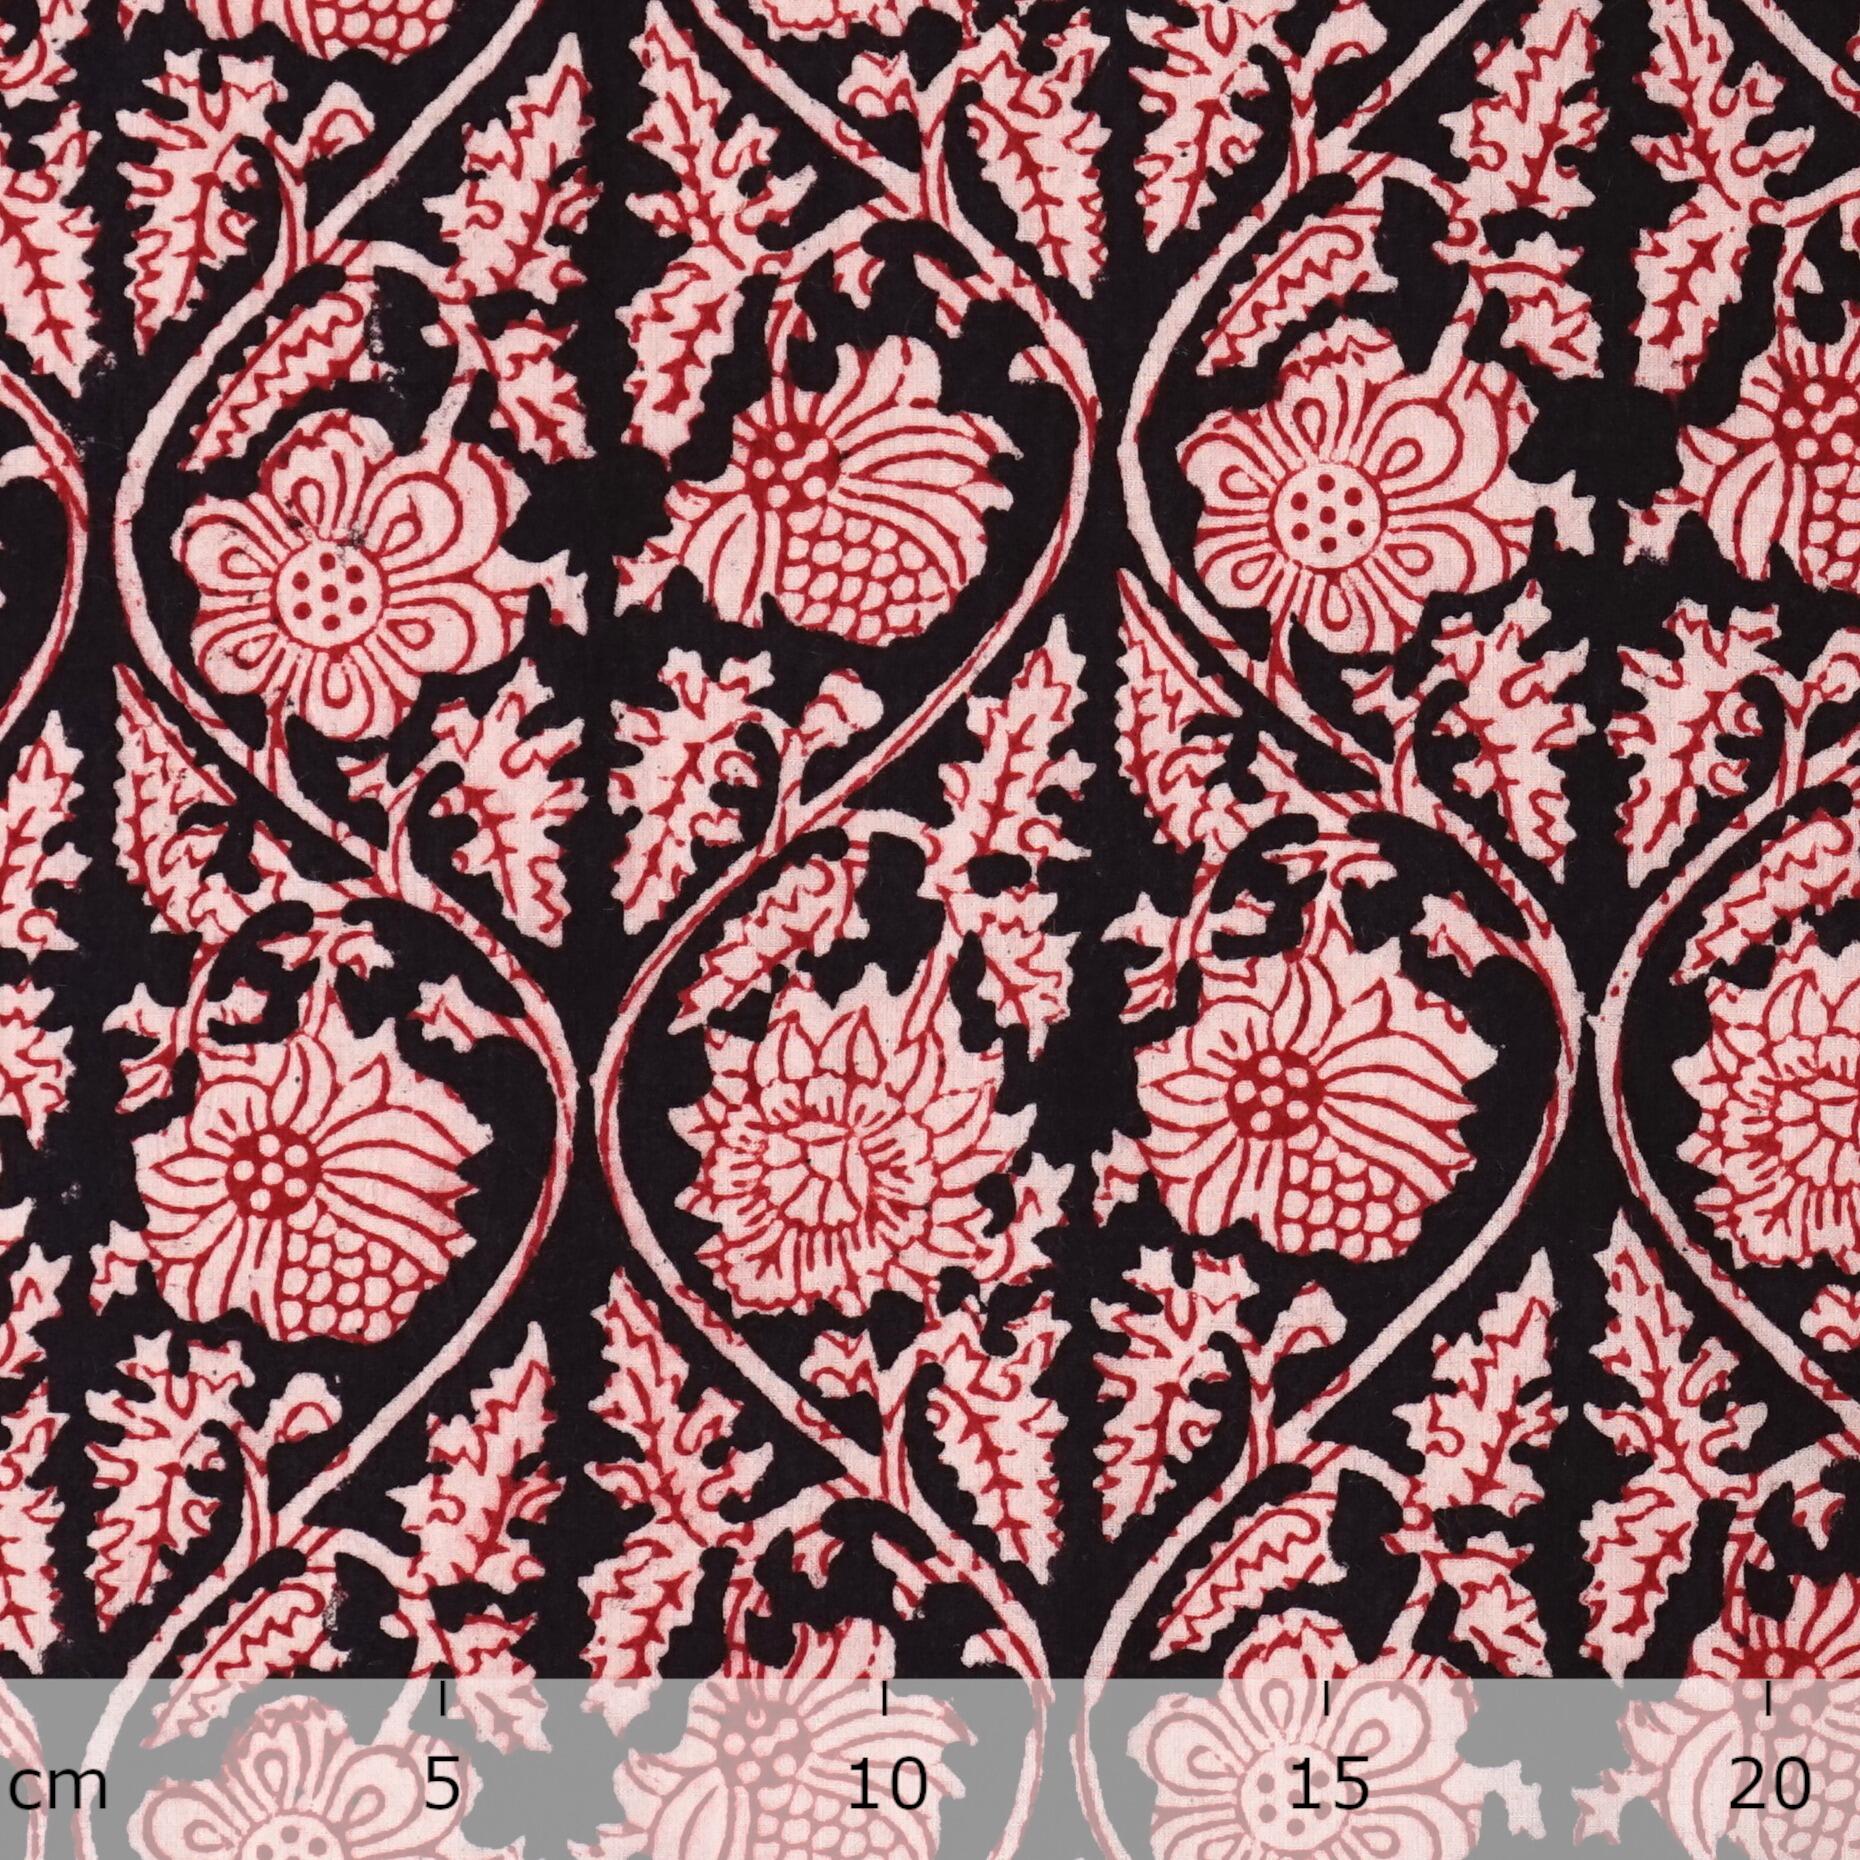 100% Block-Printed Cotton Fabric From India - Vinea Design - Iron Rust Black & Alizarin Red Dyes - Ruler